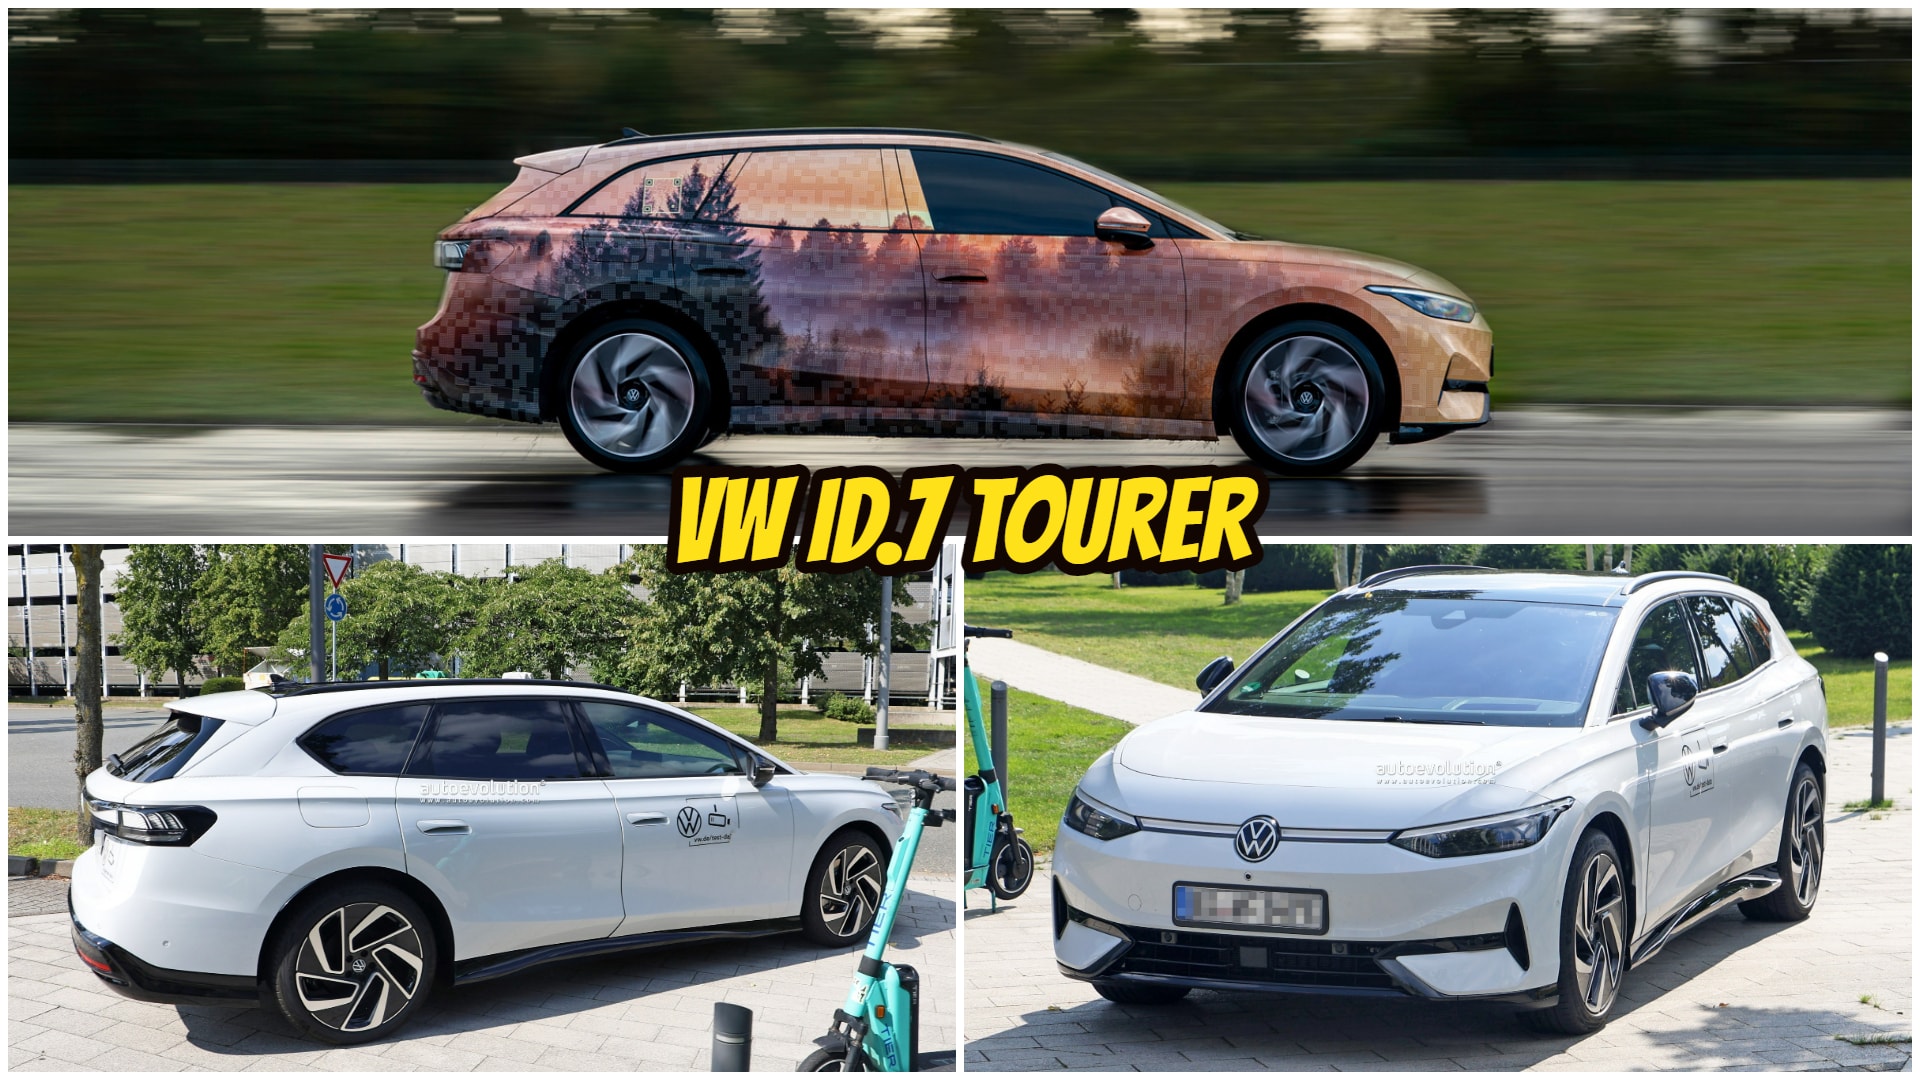 https://s1.cdn.autoevolution.com/images/news/vw-shows-off-id7-tourer-prototype-with-exclusive-camo-but-we-ve-seen-it-naked-already-223638_1.jpg